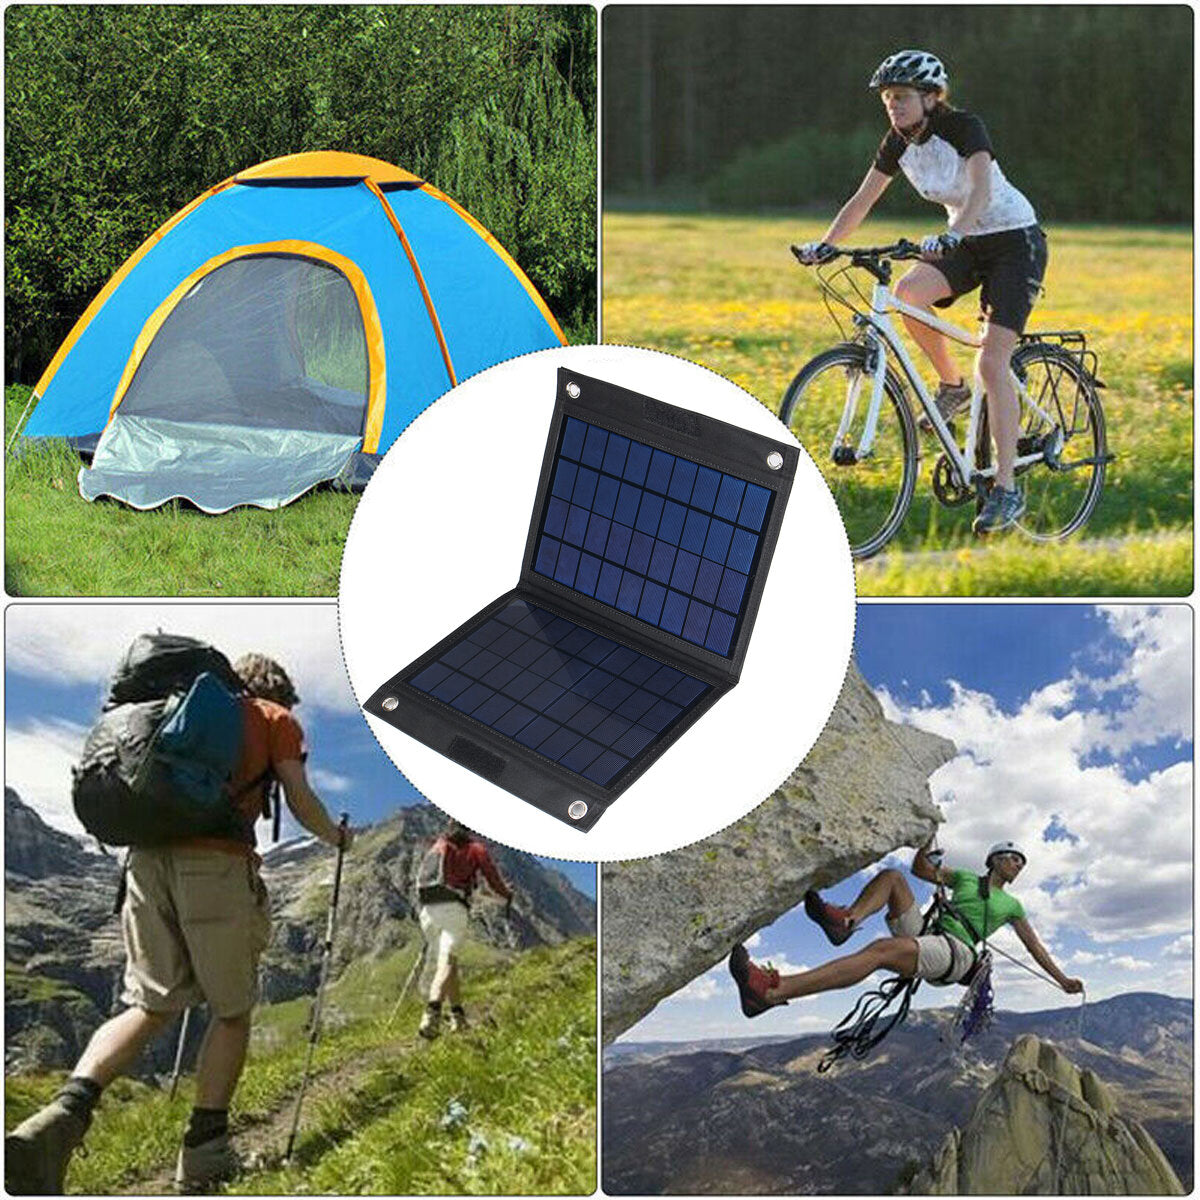 20W 18V Folding Solar Panel Charger USB Backpacking Power Bank Power Supply for Camping Travel